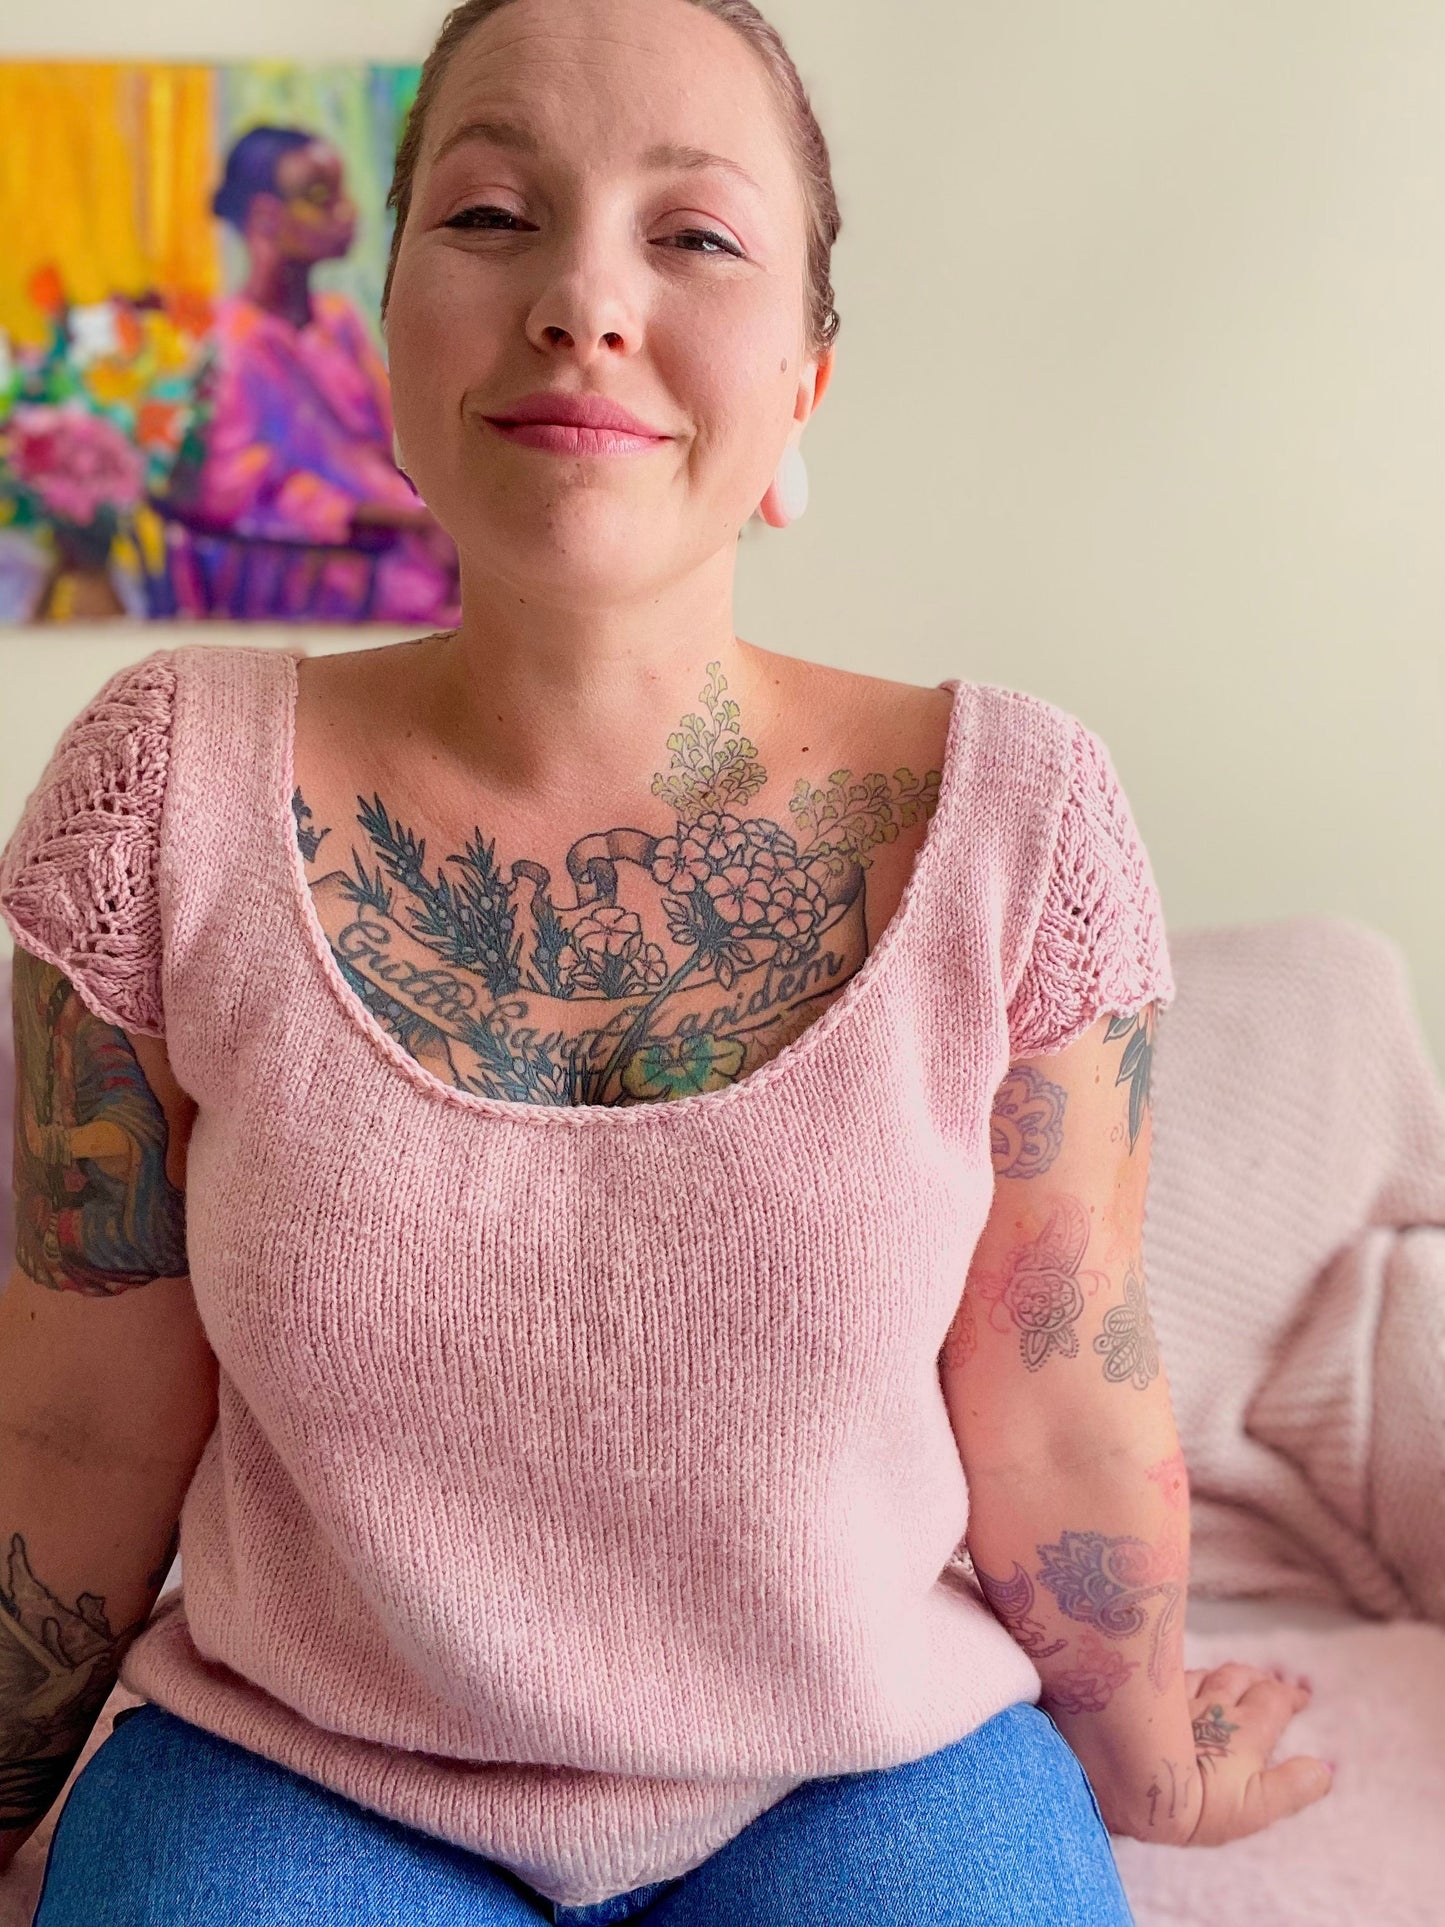 A white woman with many visible tattoos sits on a dusty pink couch. She wears a hand knit wool tee in hand dyed baby pink fingering weight yarn with lace sleeve caps and a striking scoop neckline.